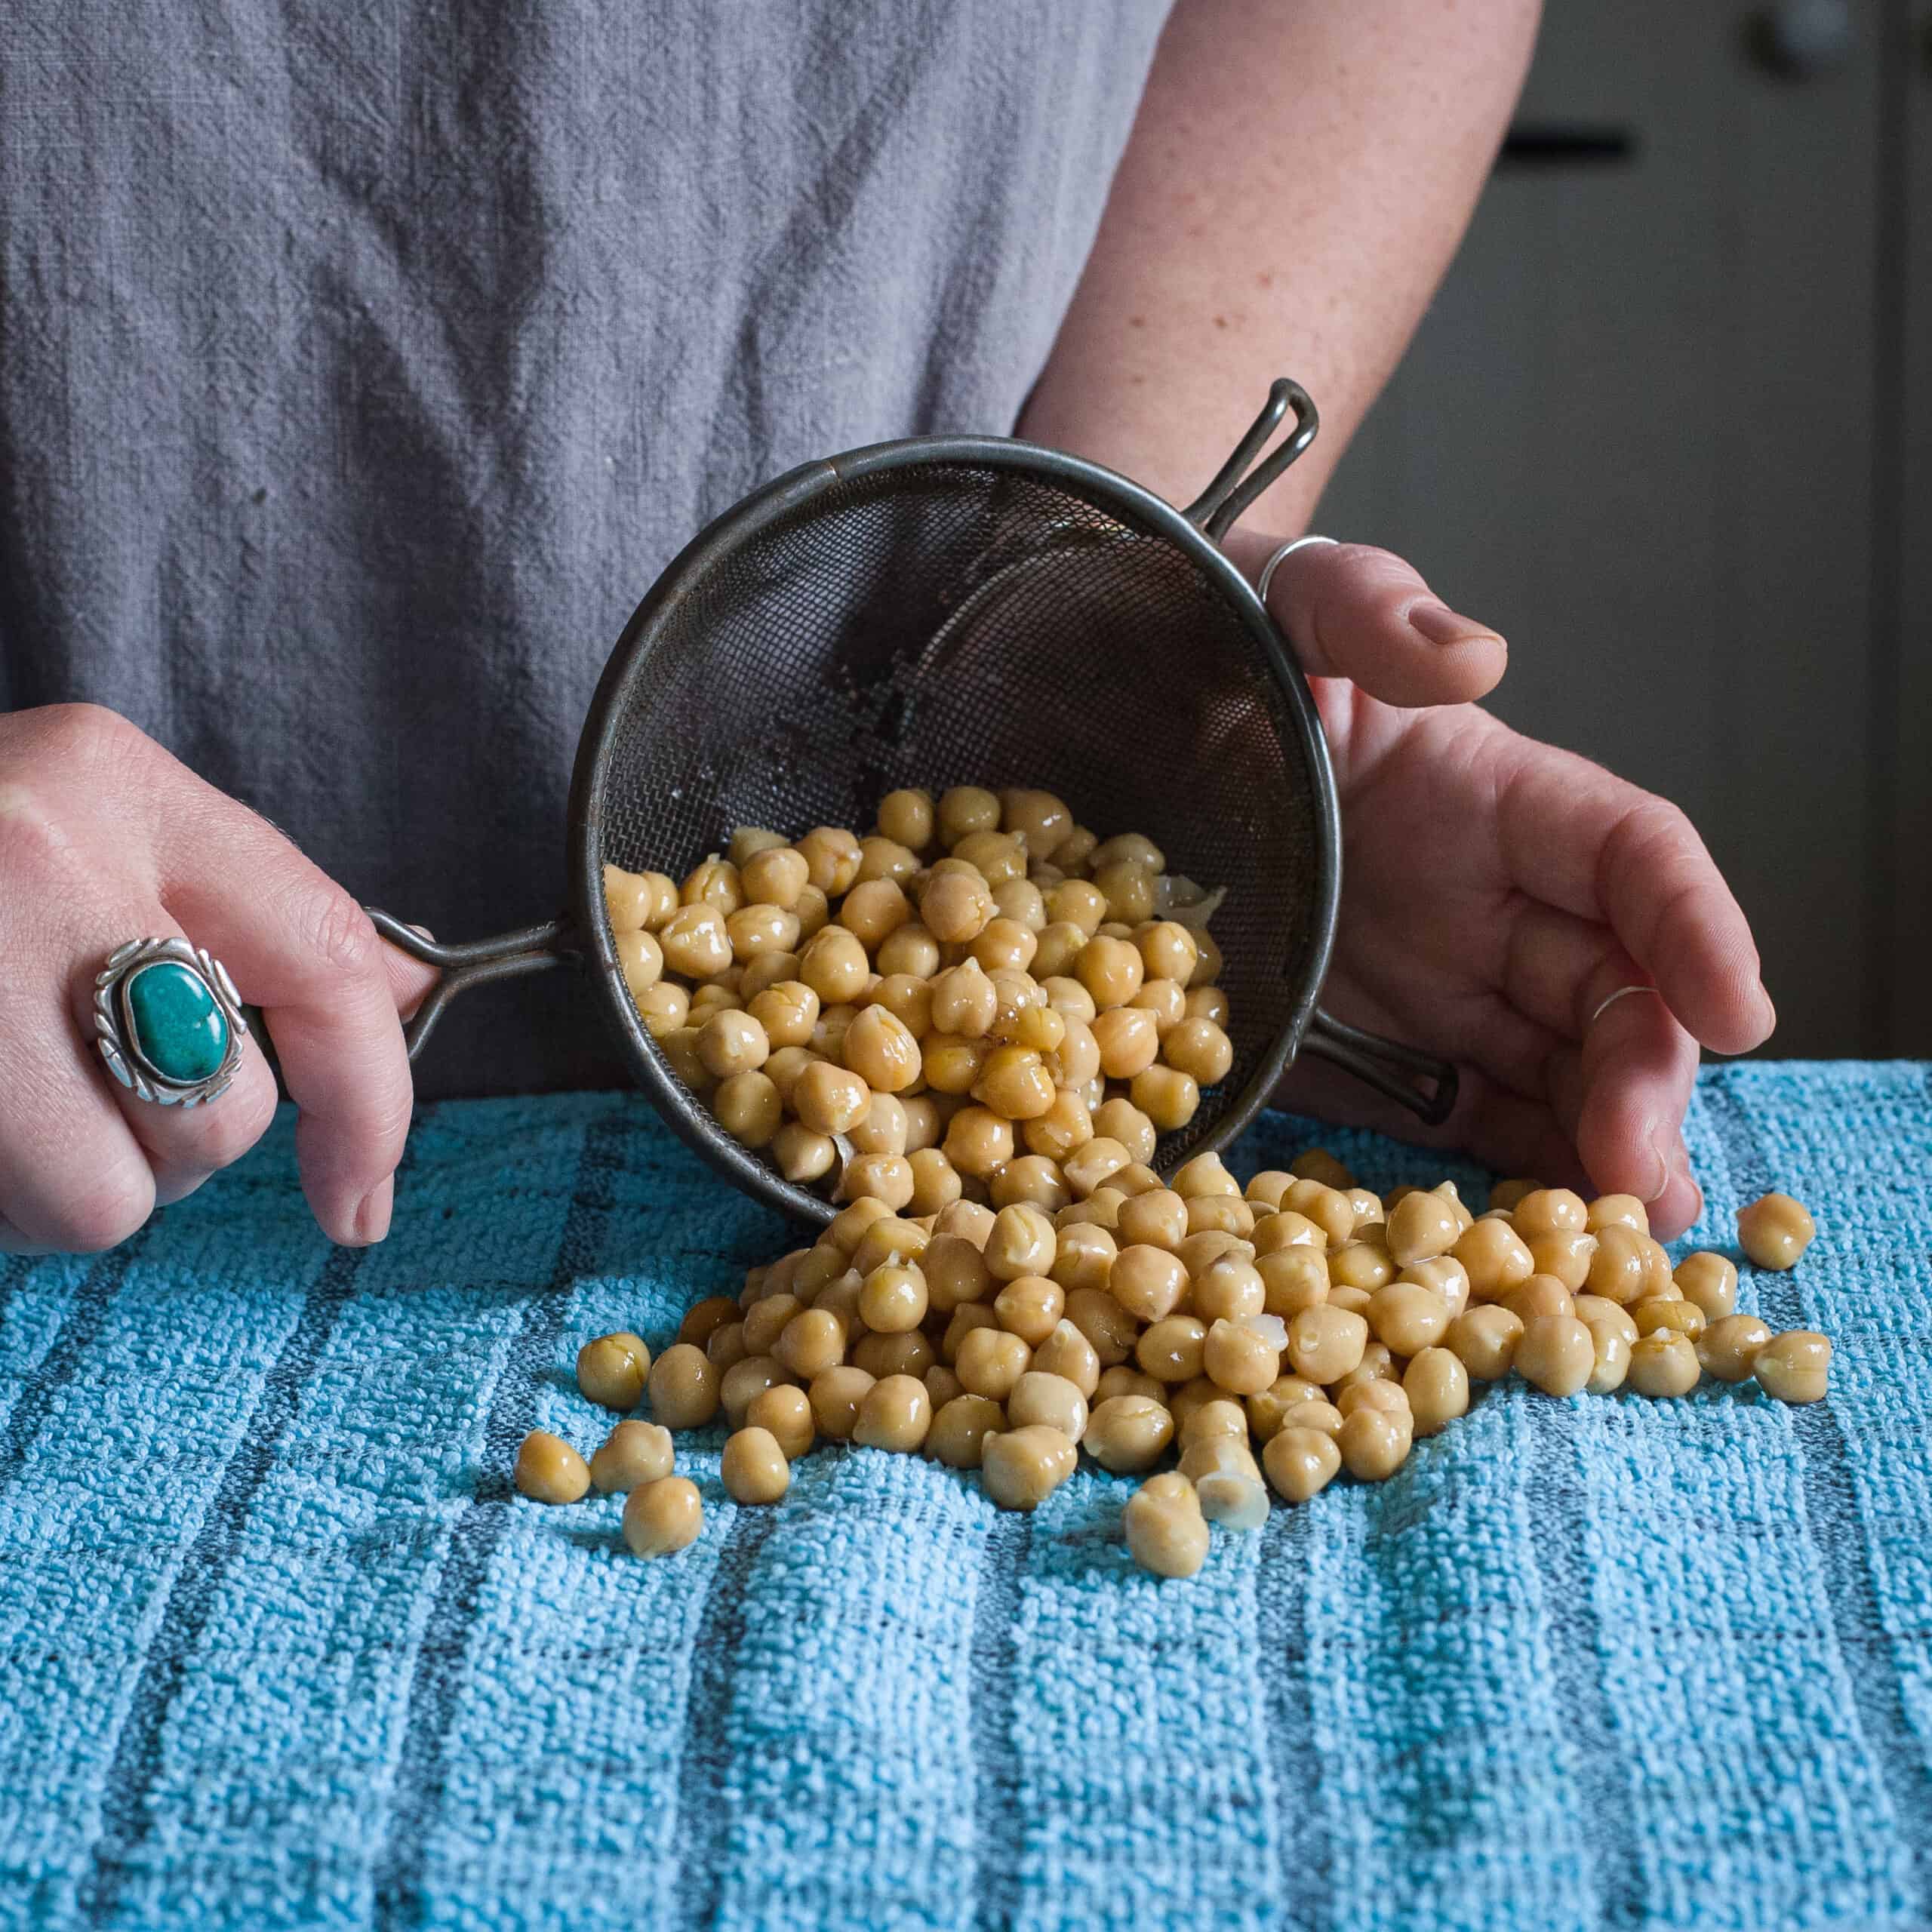 Woman’s hands tipping drained chickpeas from an old fashioned sieve onto a blue tea towel to dry